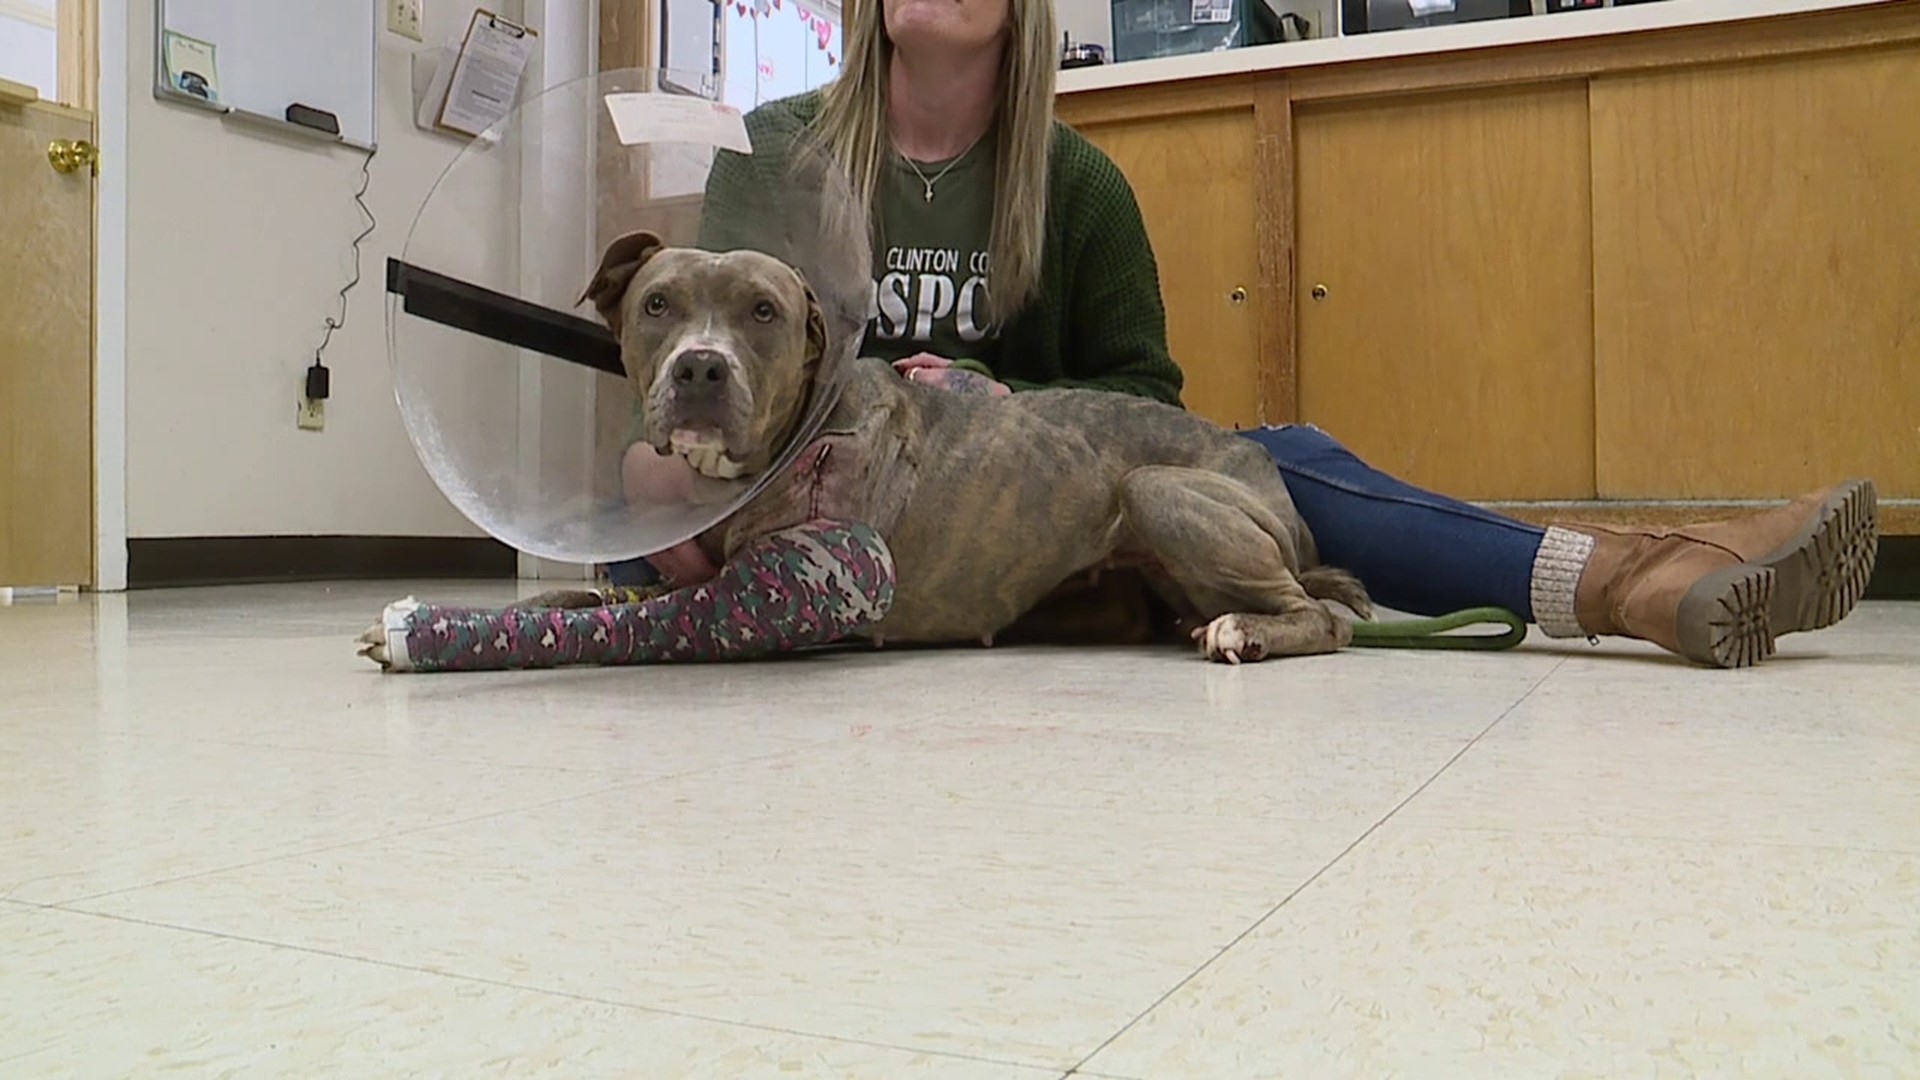 A pit bull terrier is recovering after allegedly being shot twice by its owner according to police in Clinton County.